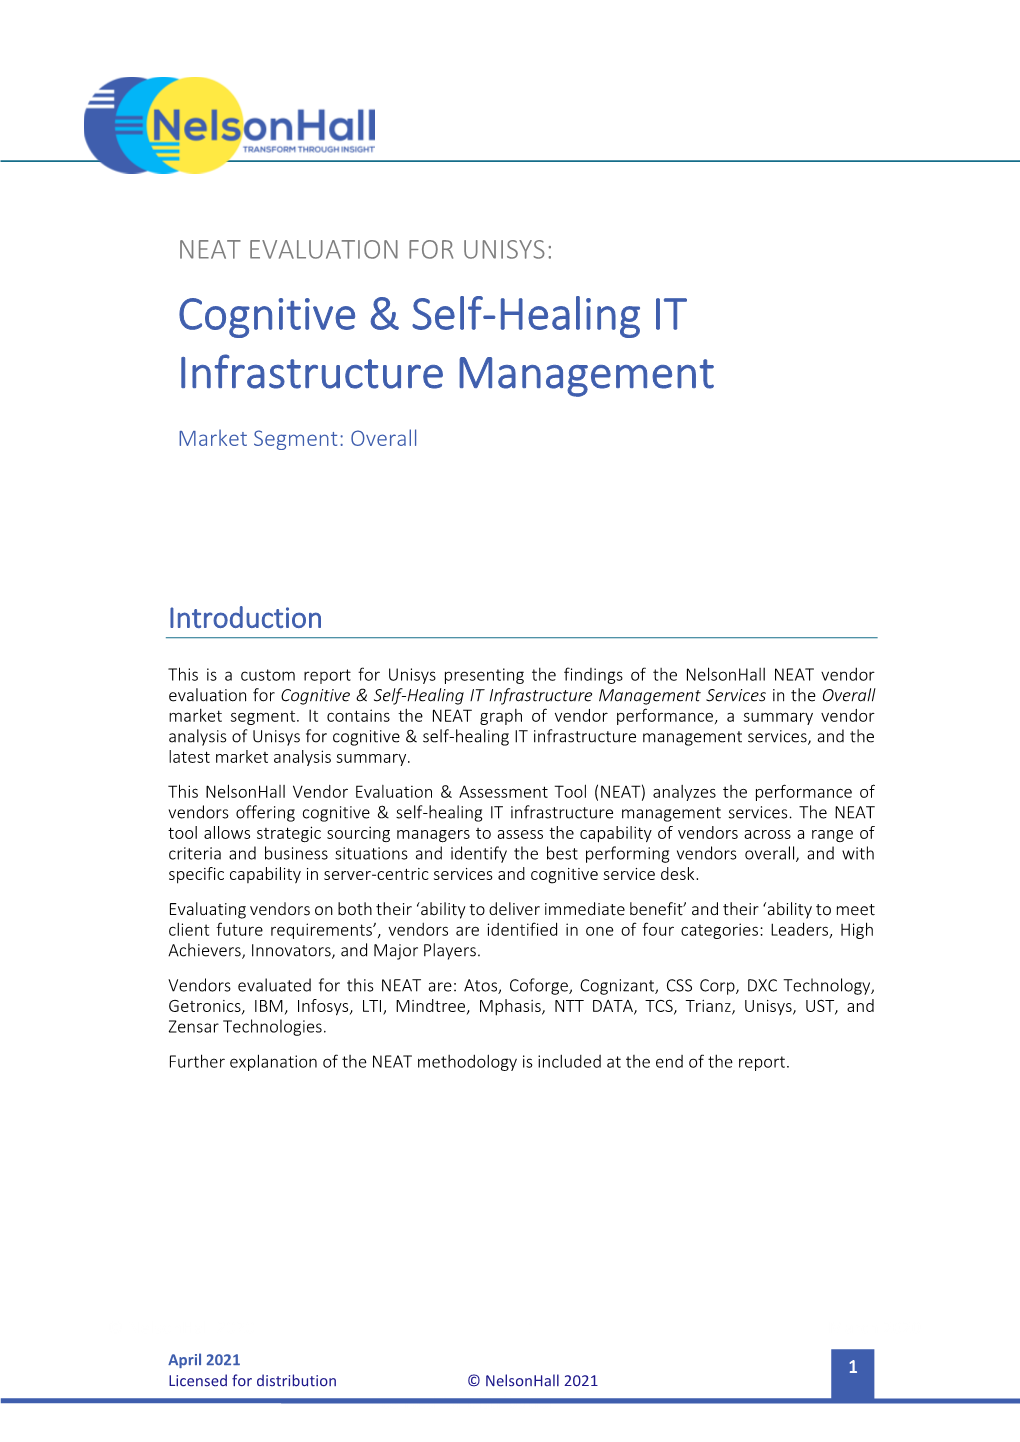 Cognitive & Self-Healing IT Infrastructure Management